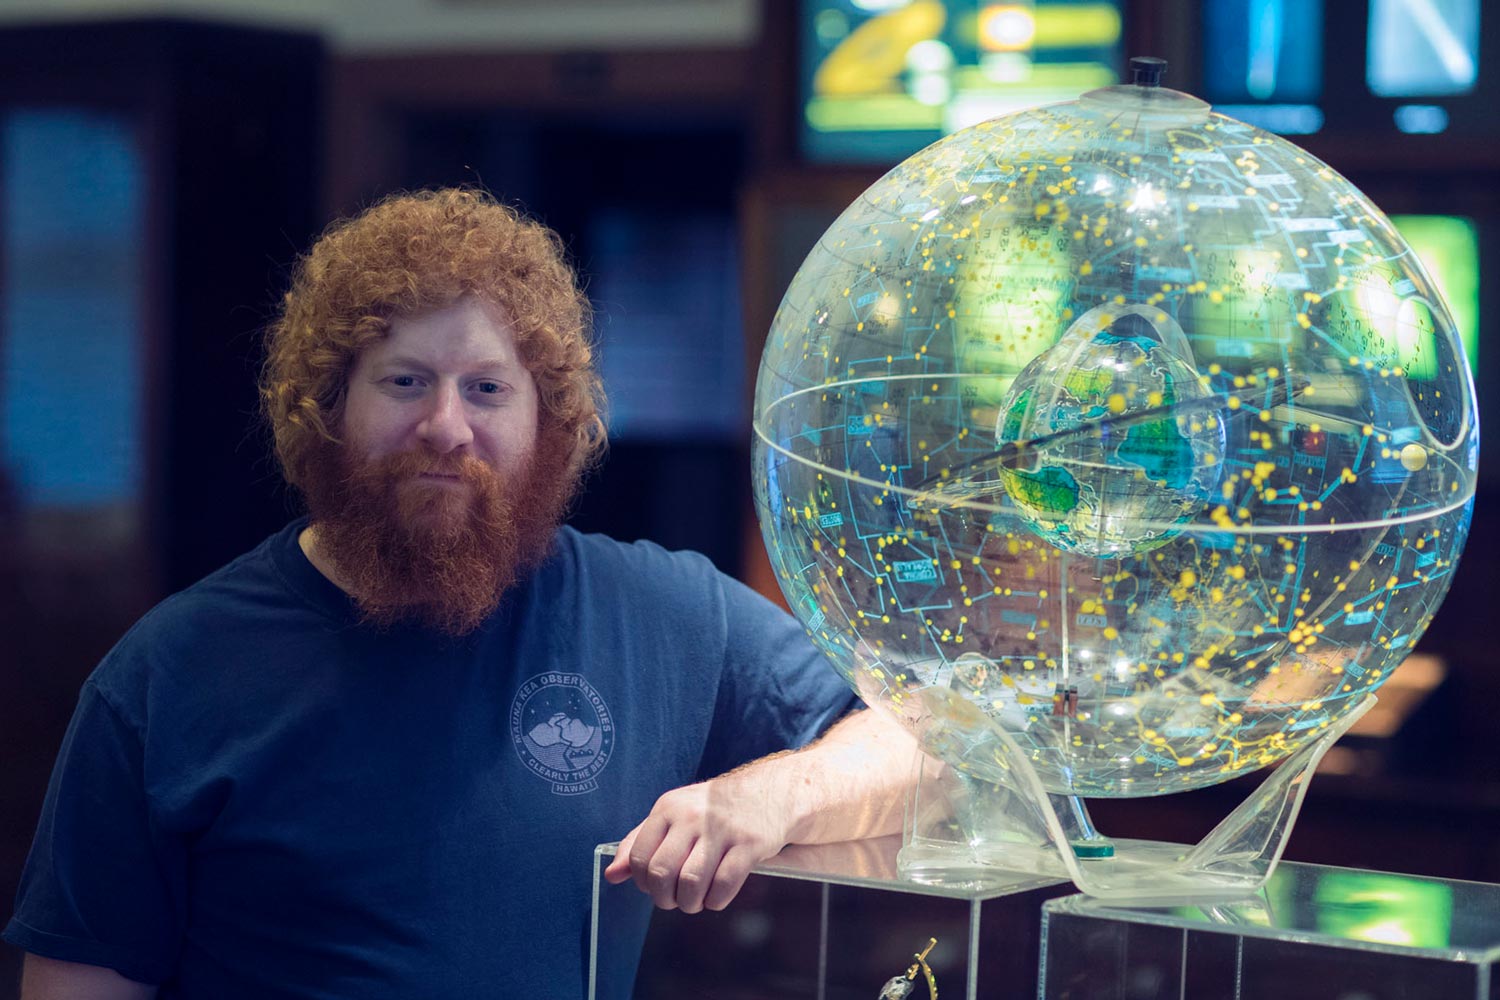 Ph.D. candidate Jake Turner stands next to a model of a planet